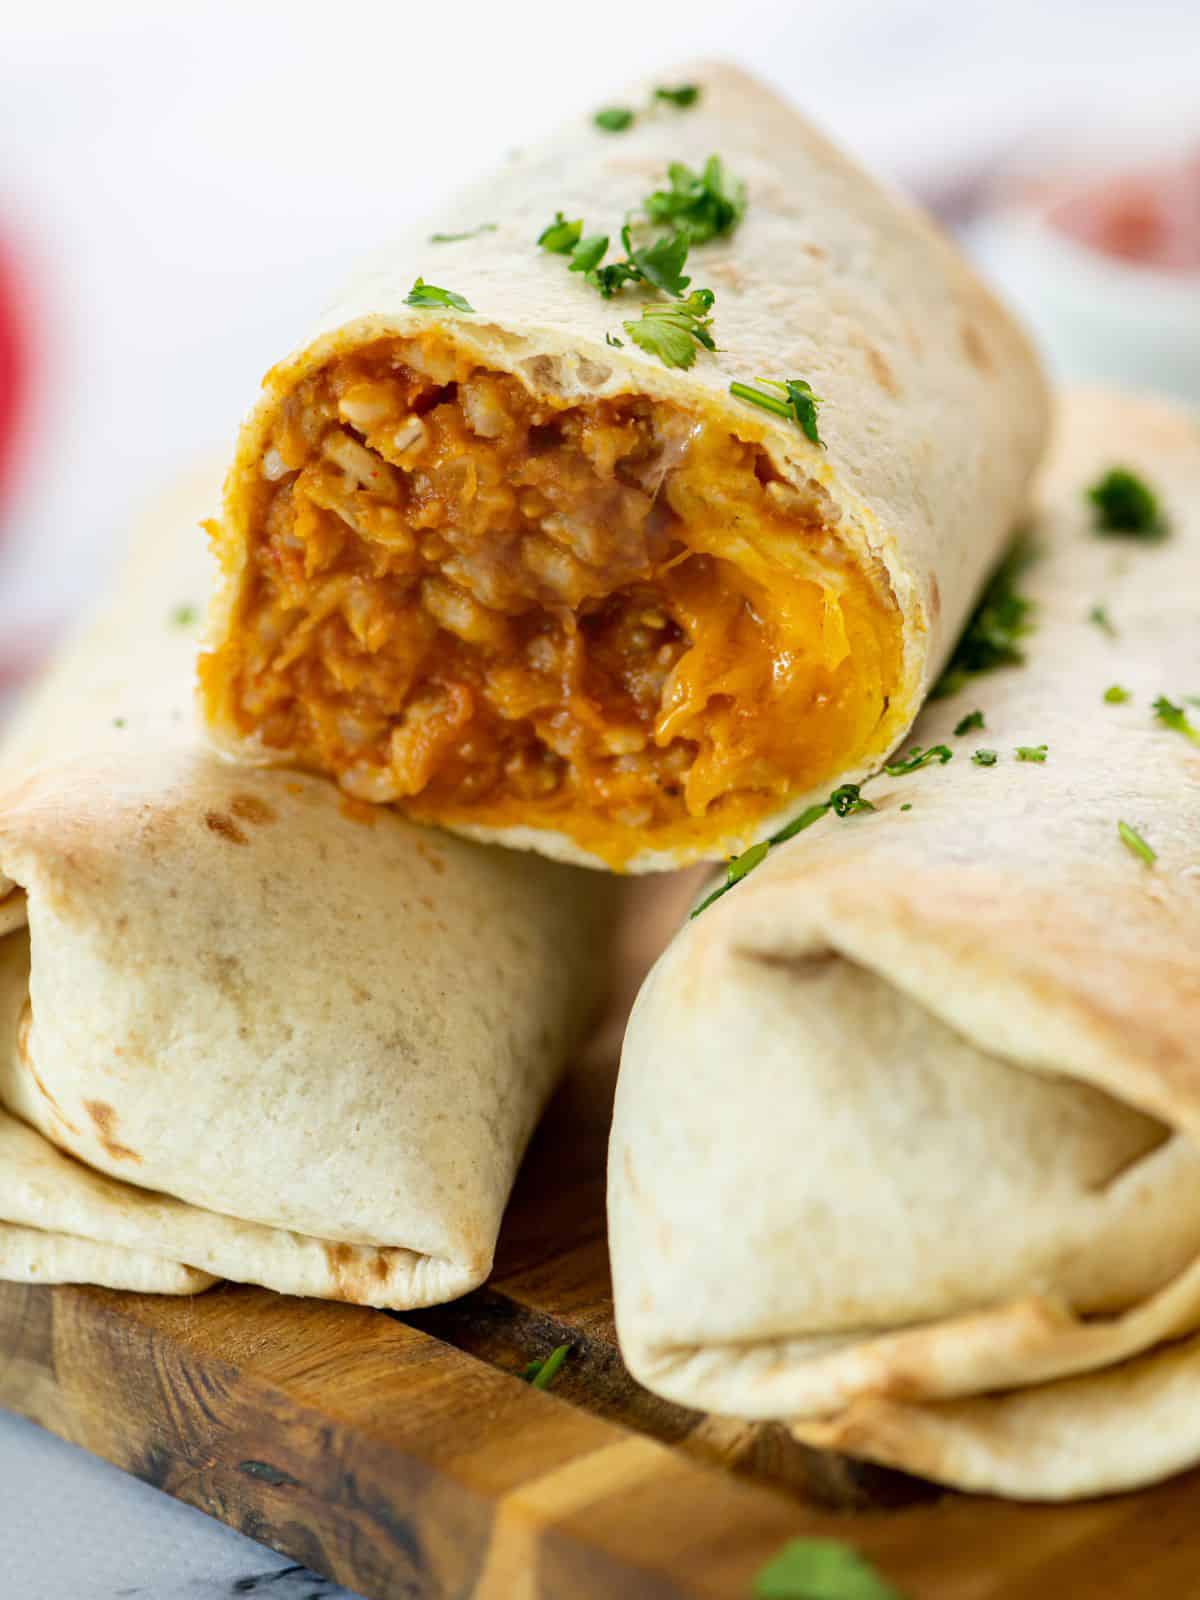 Bean Burrito Cut open to show rice, cheese and refried bean filling.